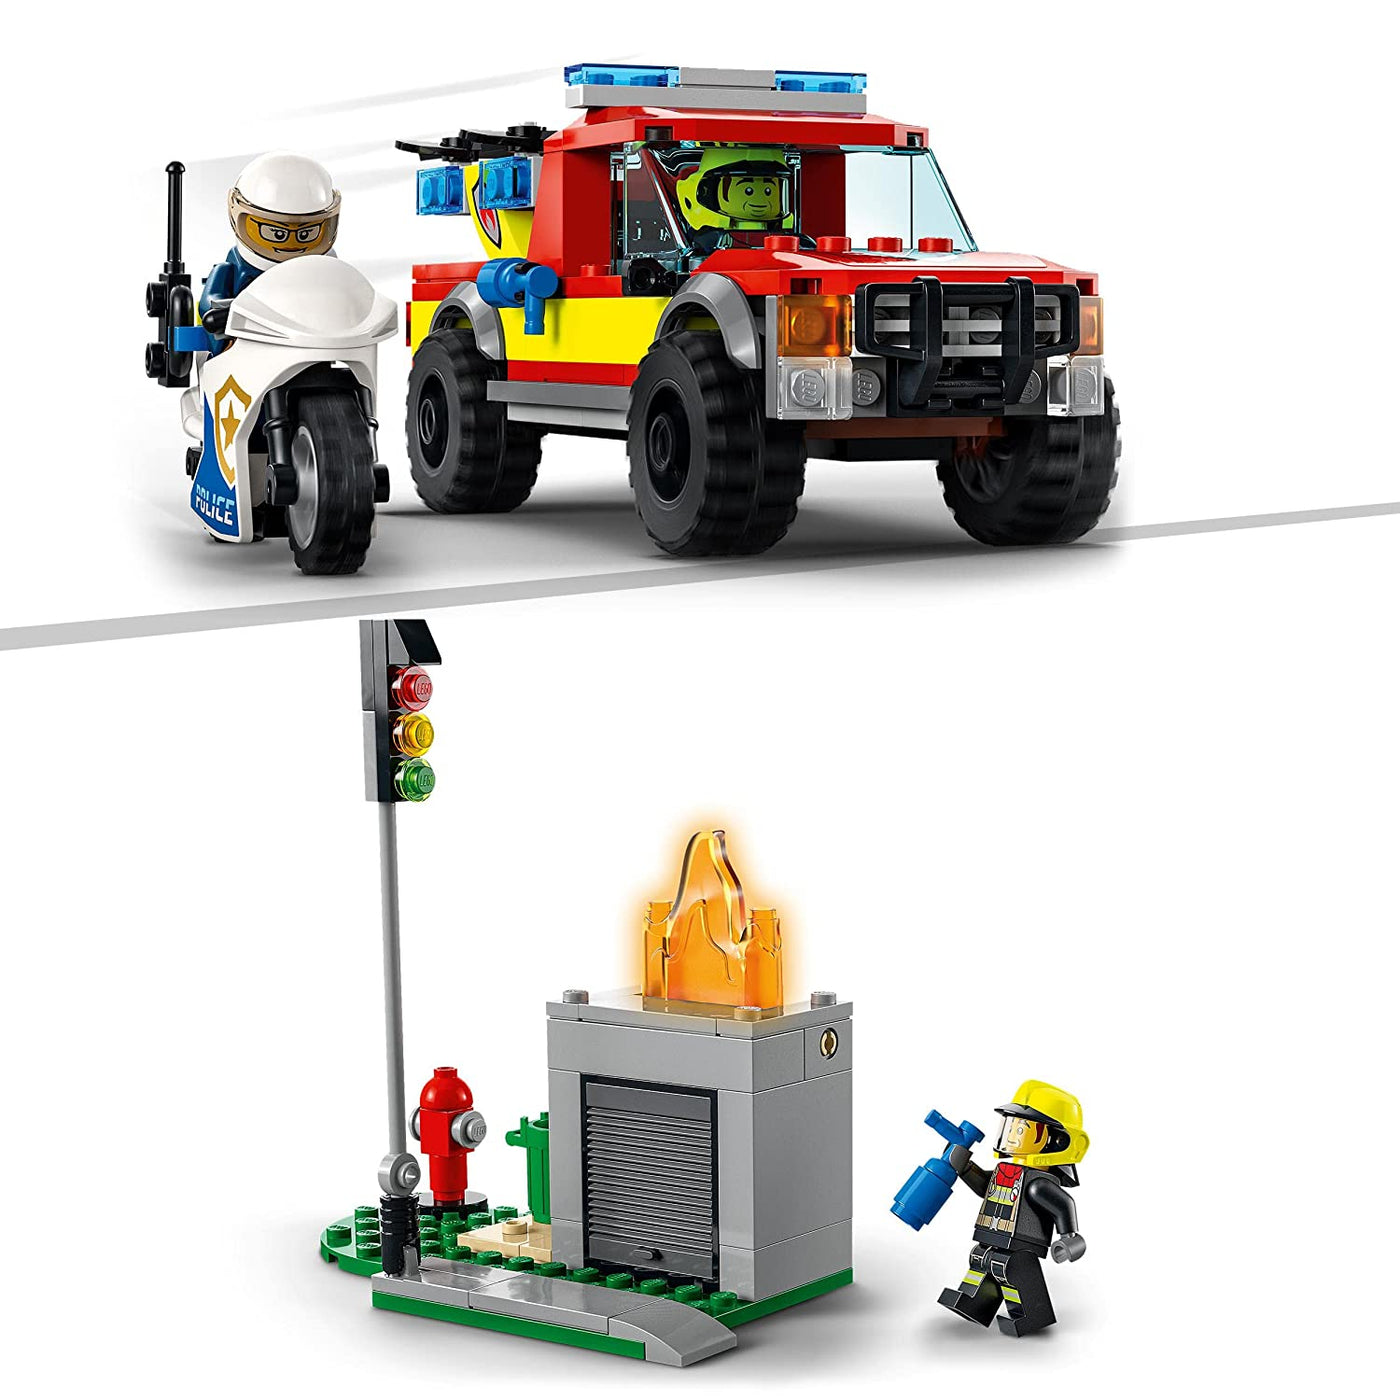 LEGO City # 60319 - Fire Rescue & Police Chase